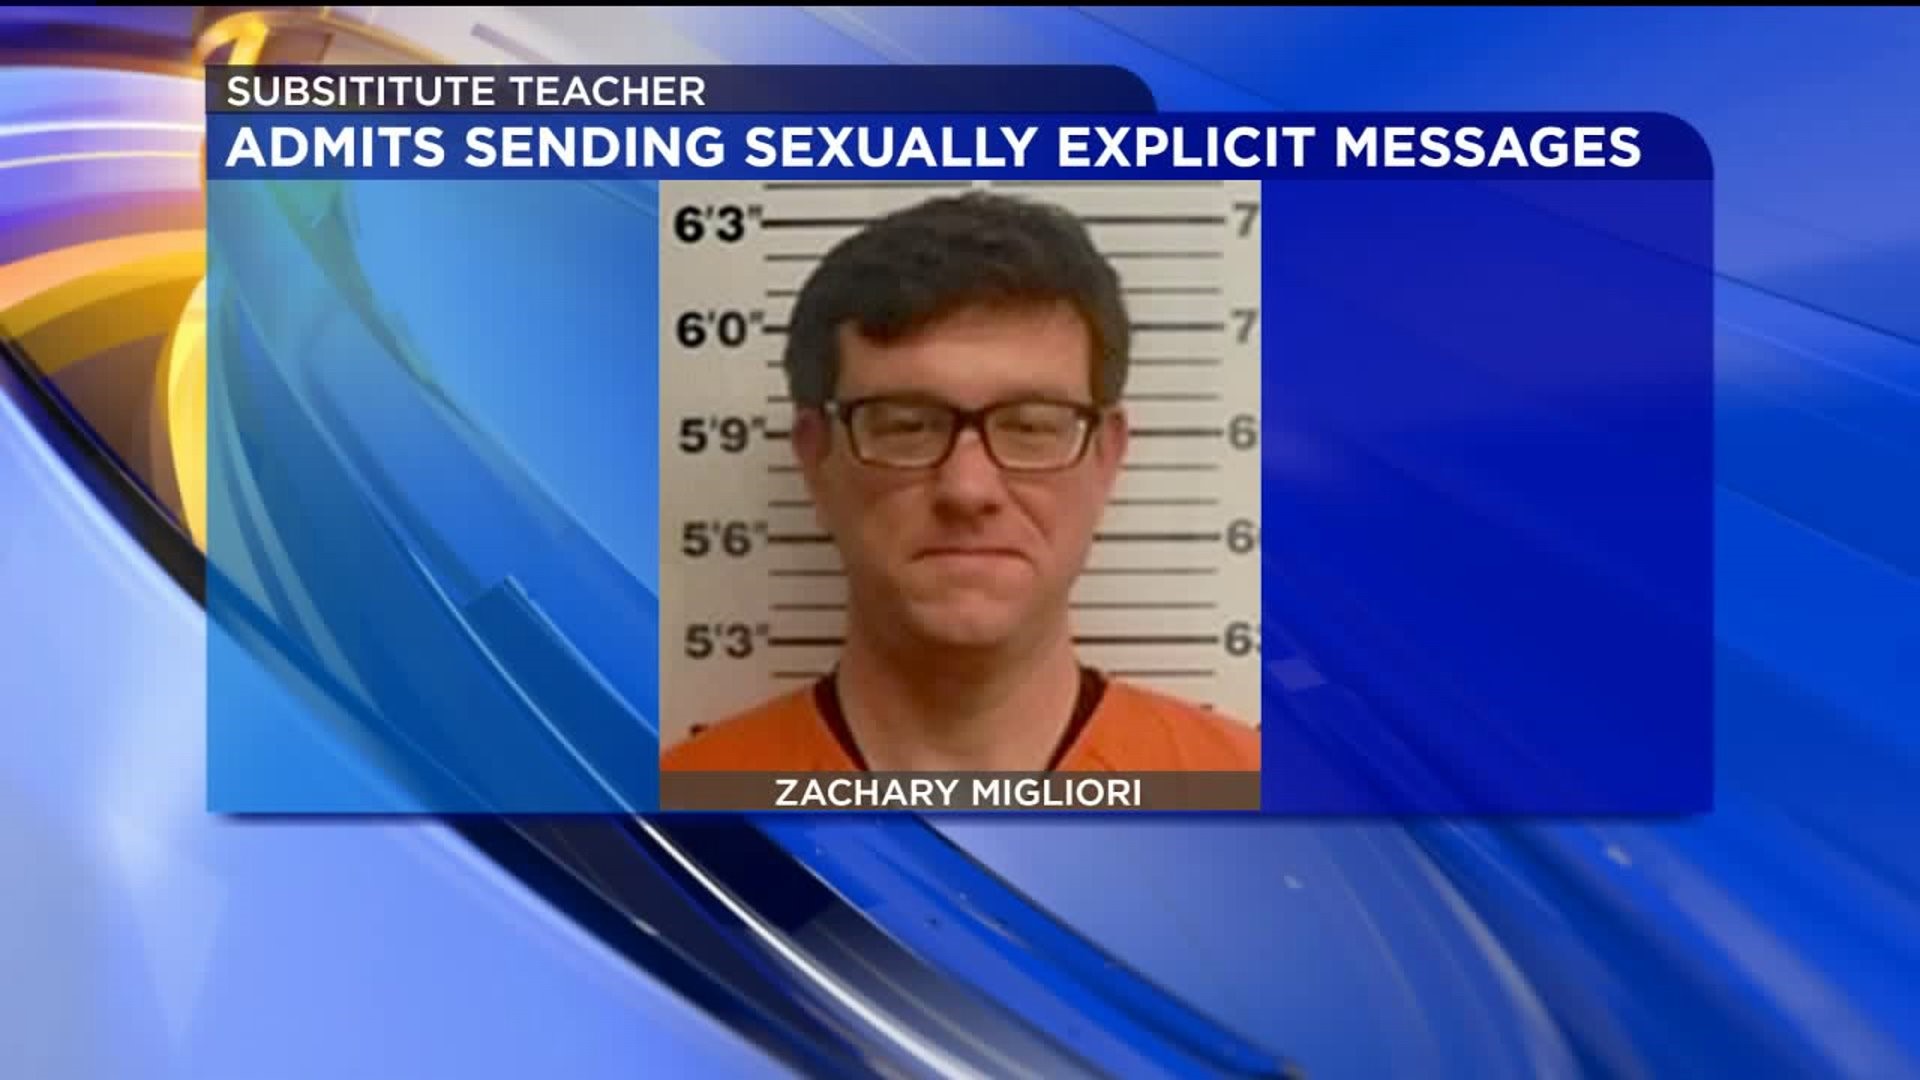 Substitute Teacher Pleads Guilty to Sending Inappropriate Messages to Students